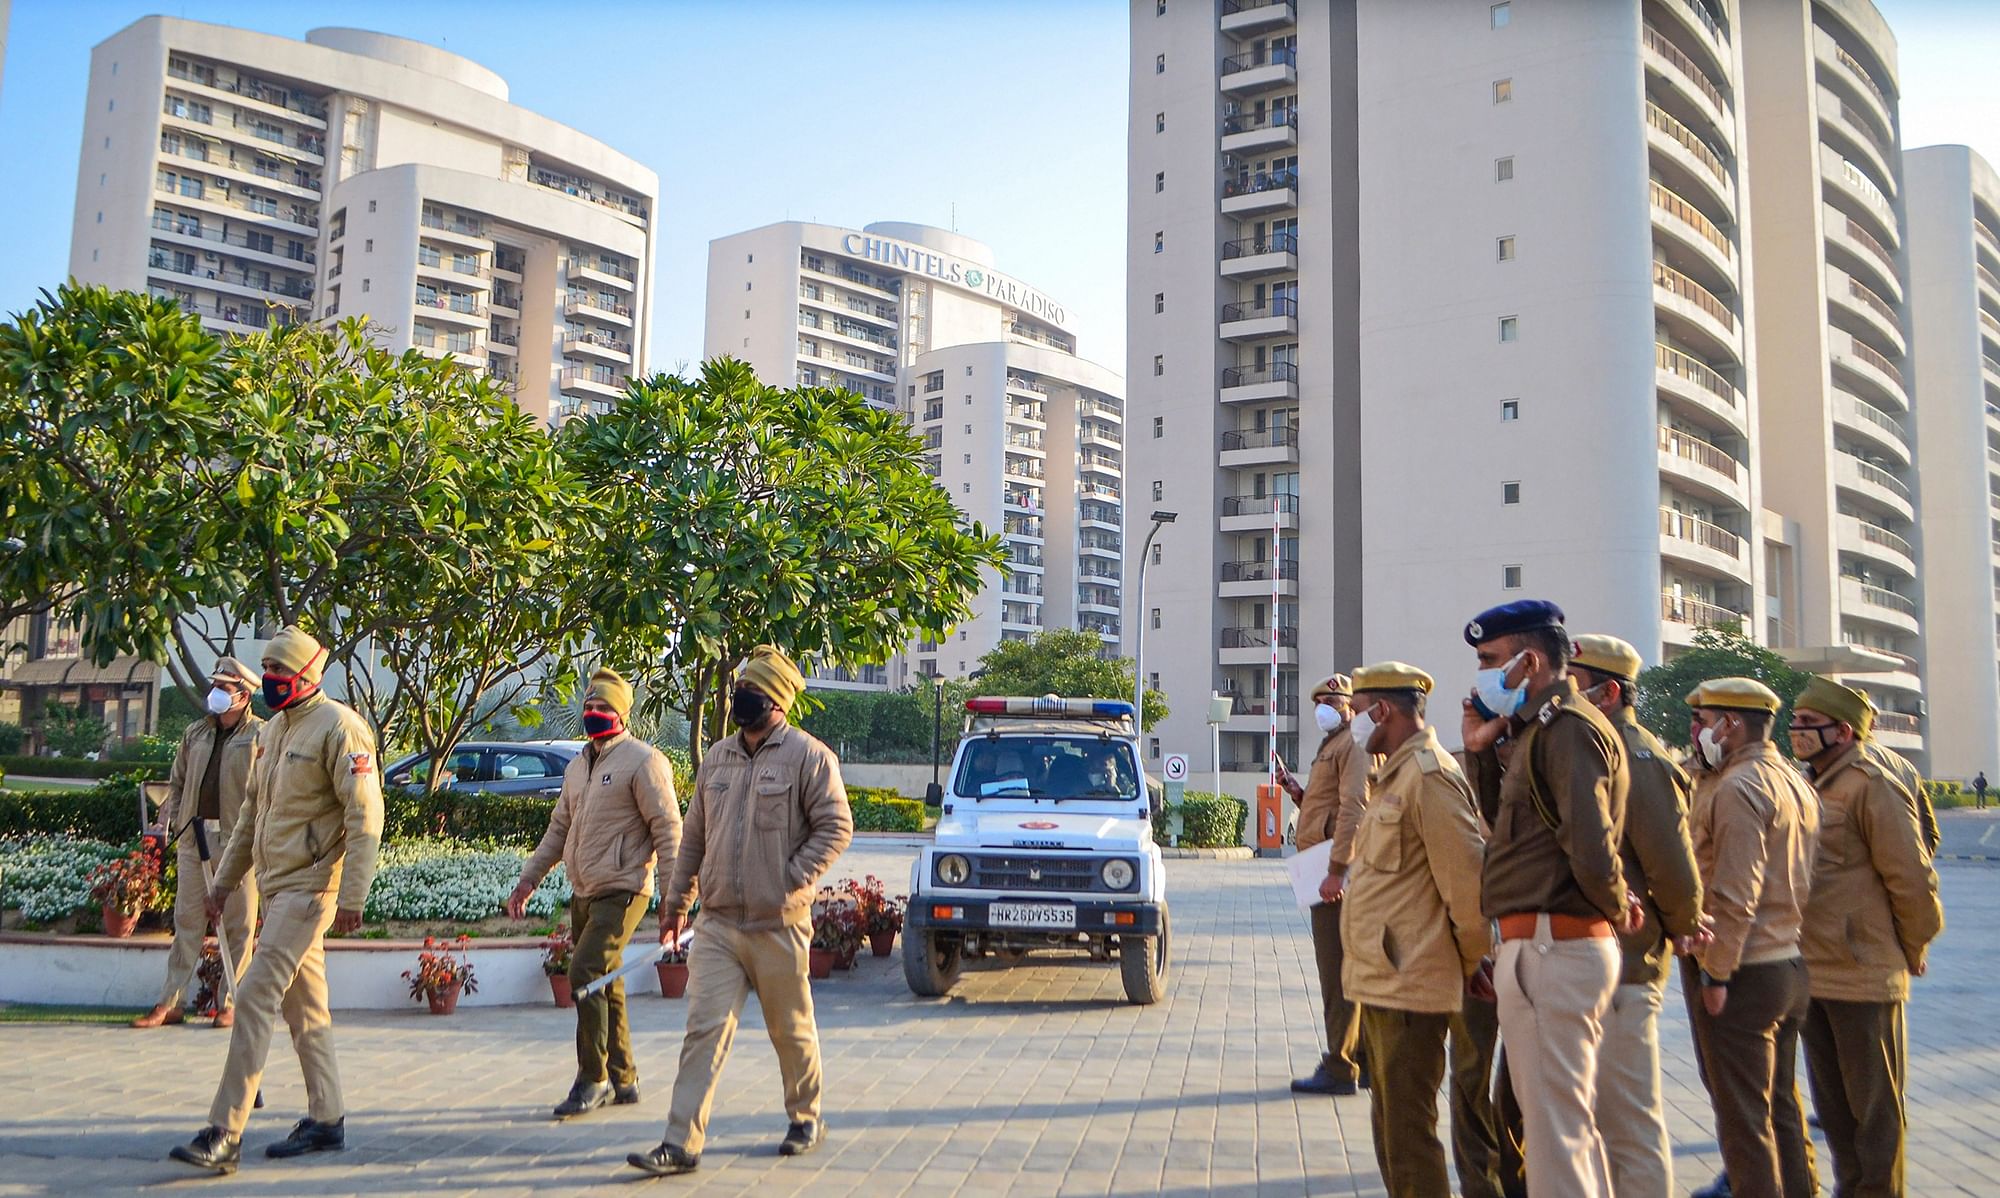 <div class="paragraphs"><p>On 10 February 2022, a portion of the sixth floor of Tower-D in Gurugram’s Chintels Paradiso housing society collapsed. Two women died and several homes were damaged.</p></div>